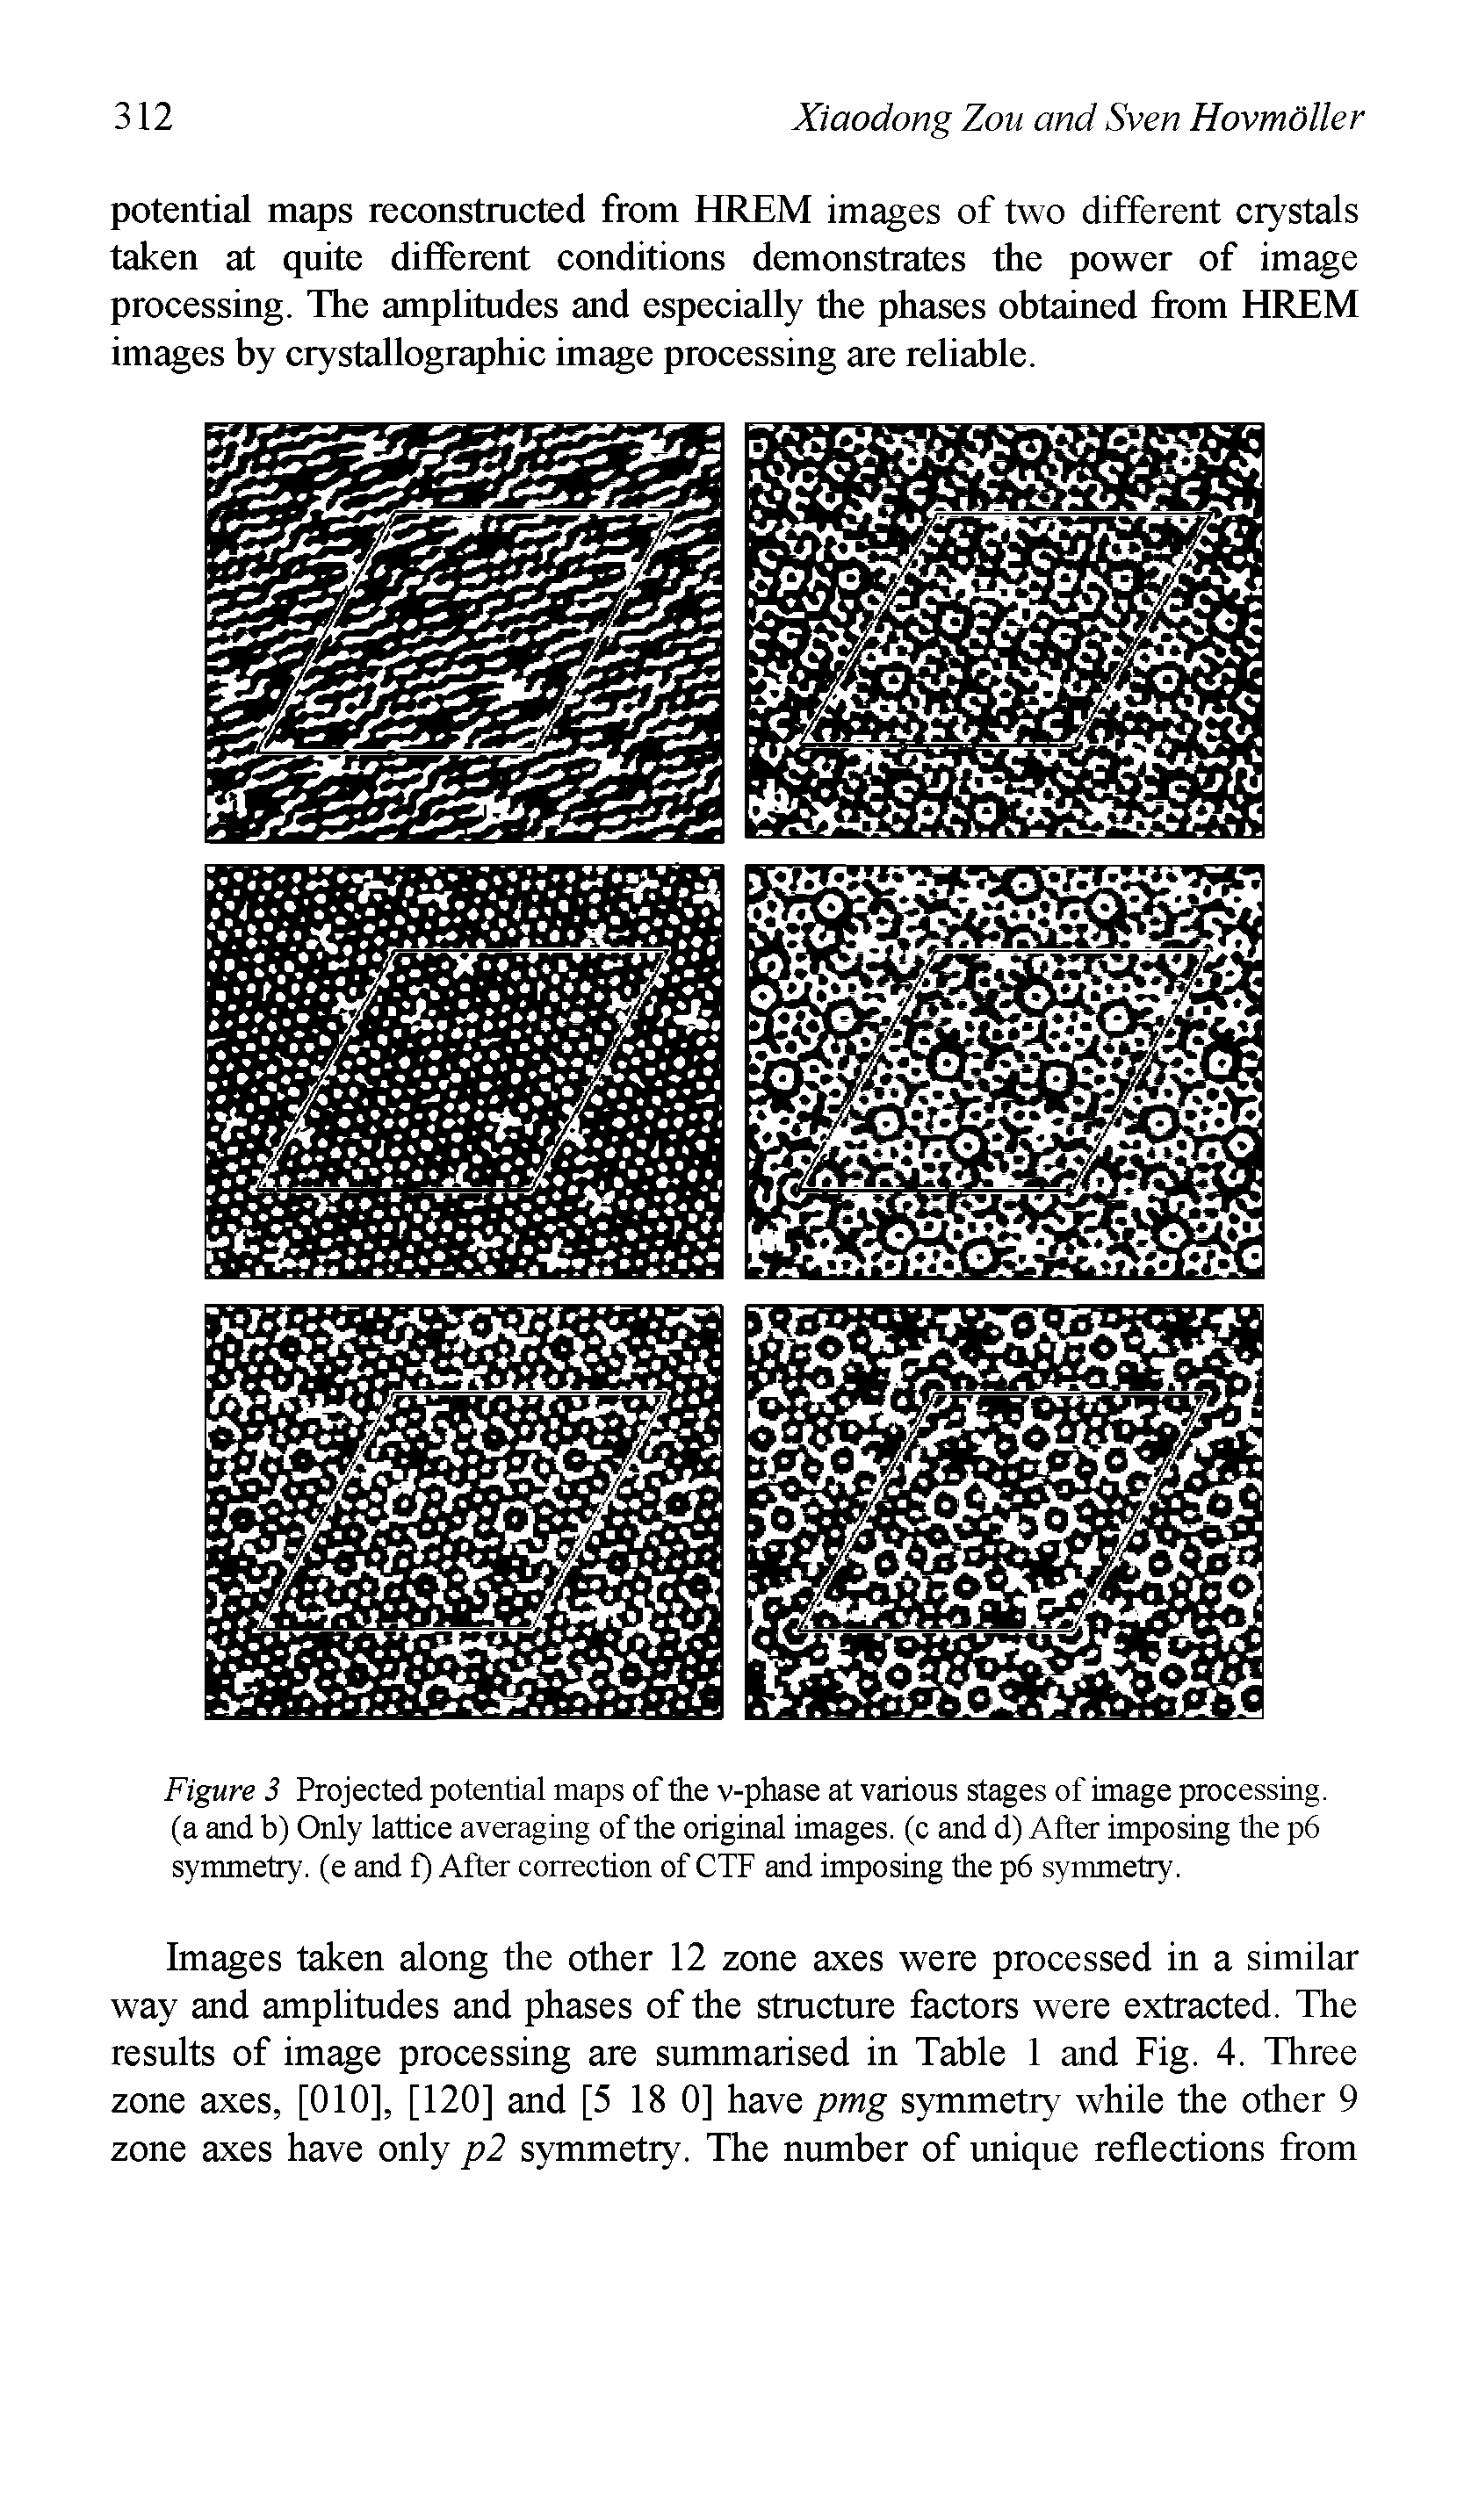 Figure 3 Projected potential maps of the v-phase at various stages of image processing, (a and b) Only lattice averaging of the original images, (c and d) After imposing the p6 symmetry, (e and f) After correction of CTF and imposing the p6 symmetry.